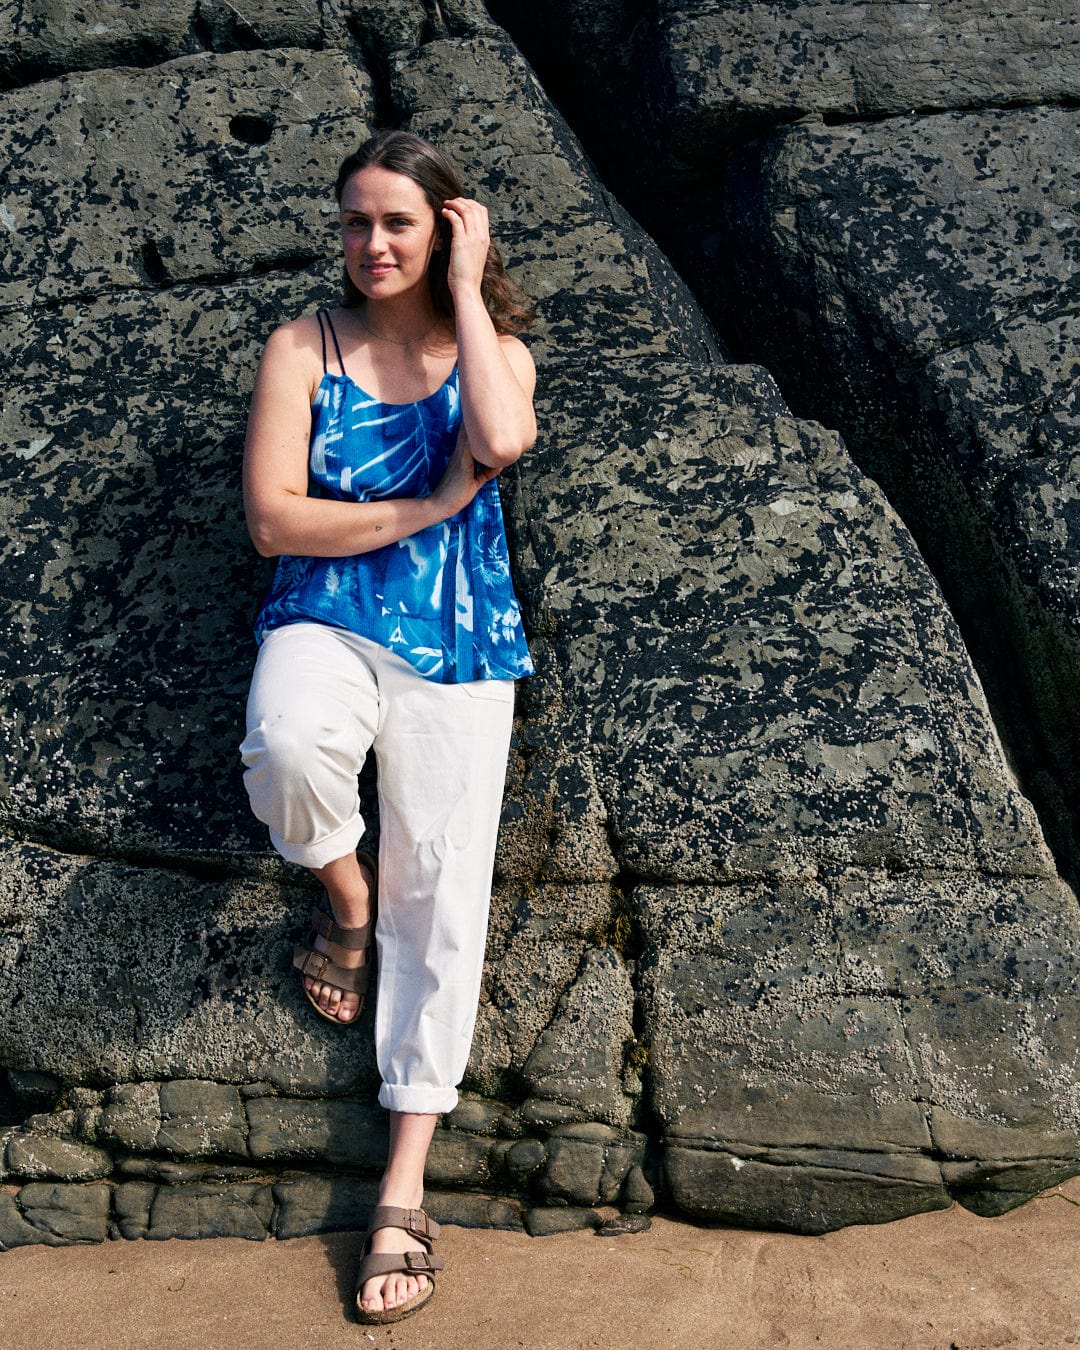 Saltrock Cyanotype - Womens Cami - Blue and white pants stand next to a textured rock formation, with one foot resting on the rock, and her hand touching her hair.